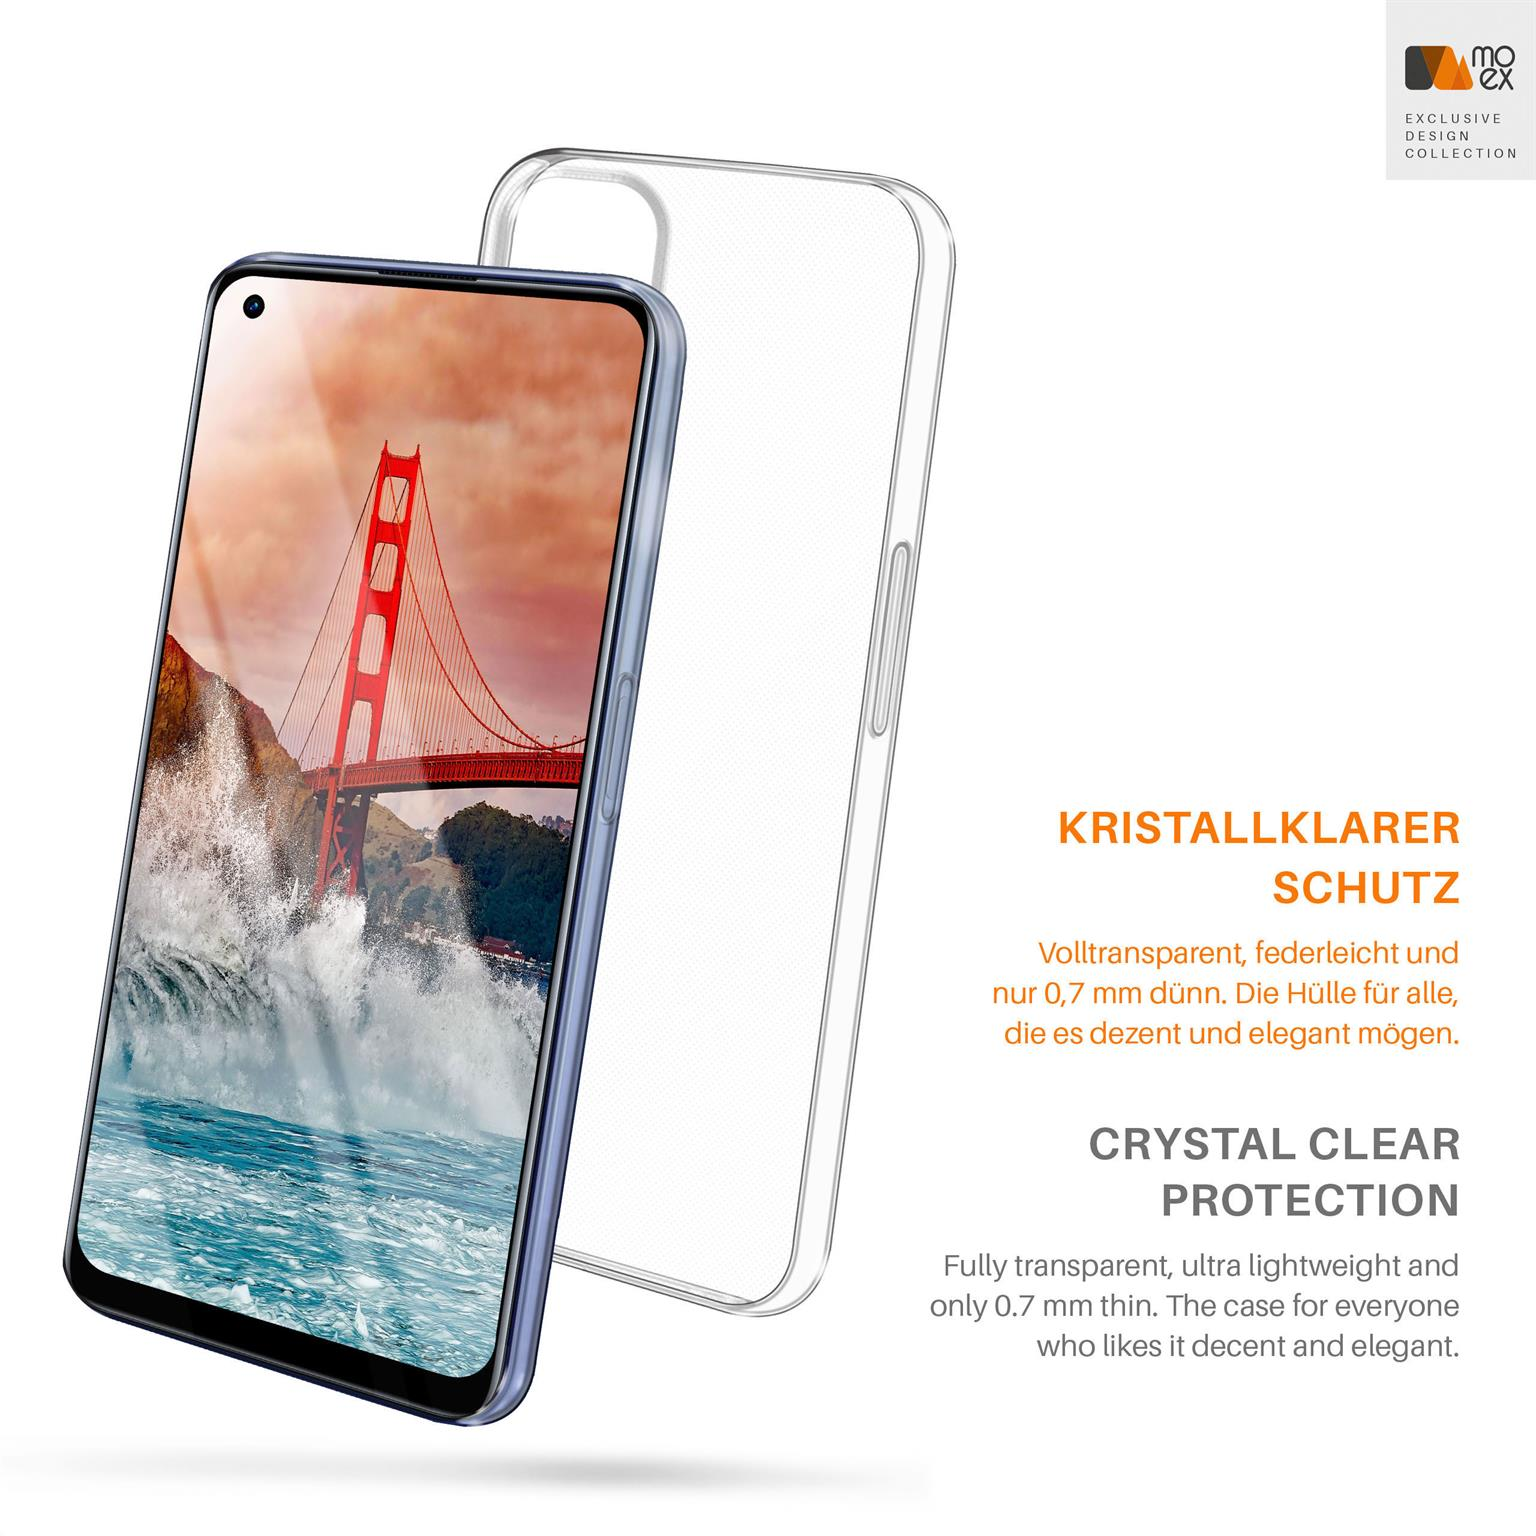 MOEX Pro, 7 Aero Backcover, Case, Crystal-Clear Realme,